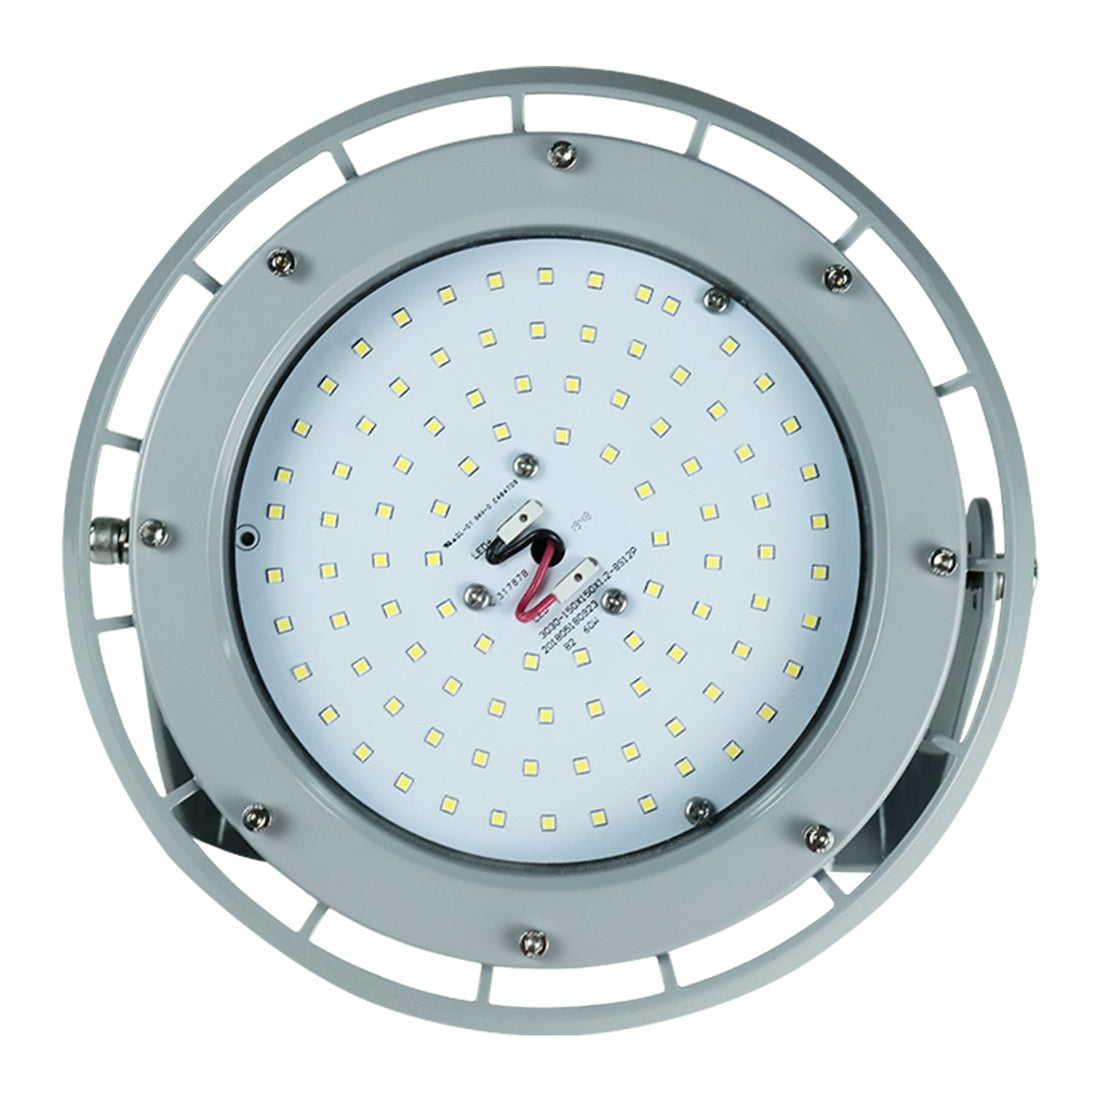 B Series 250W Dimmable LED Explosion Proof Lighting - 5000K, 35000LM, IP66 Rated for Hazardous Locations - Ideal for Oil &amp; Gas Refineries, Drilling Rigs, Petrochemical Facilities